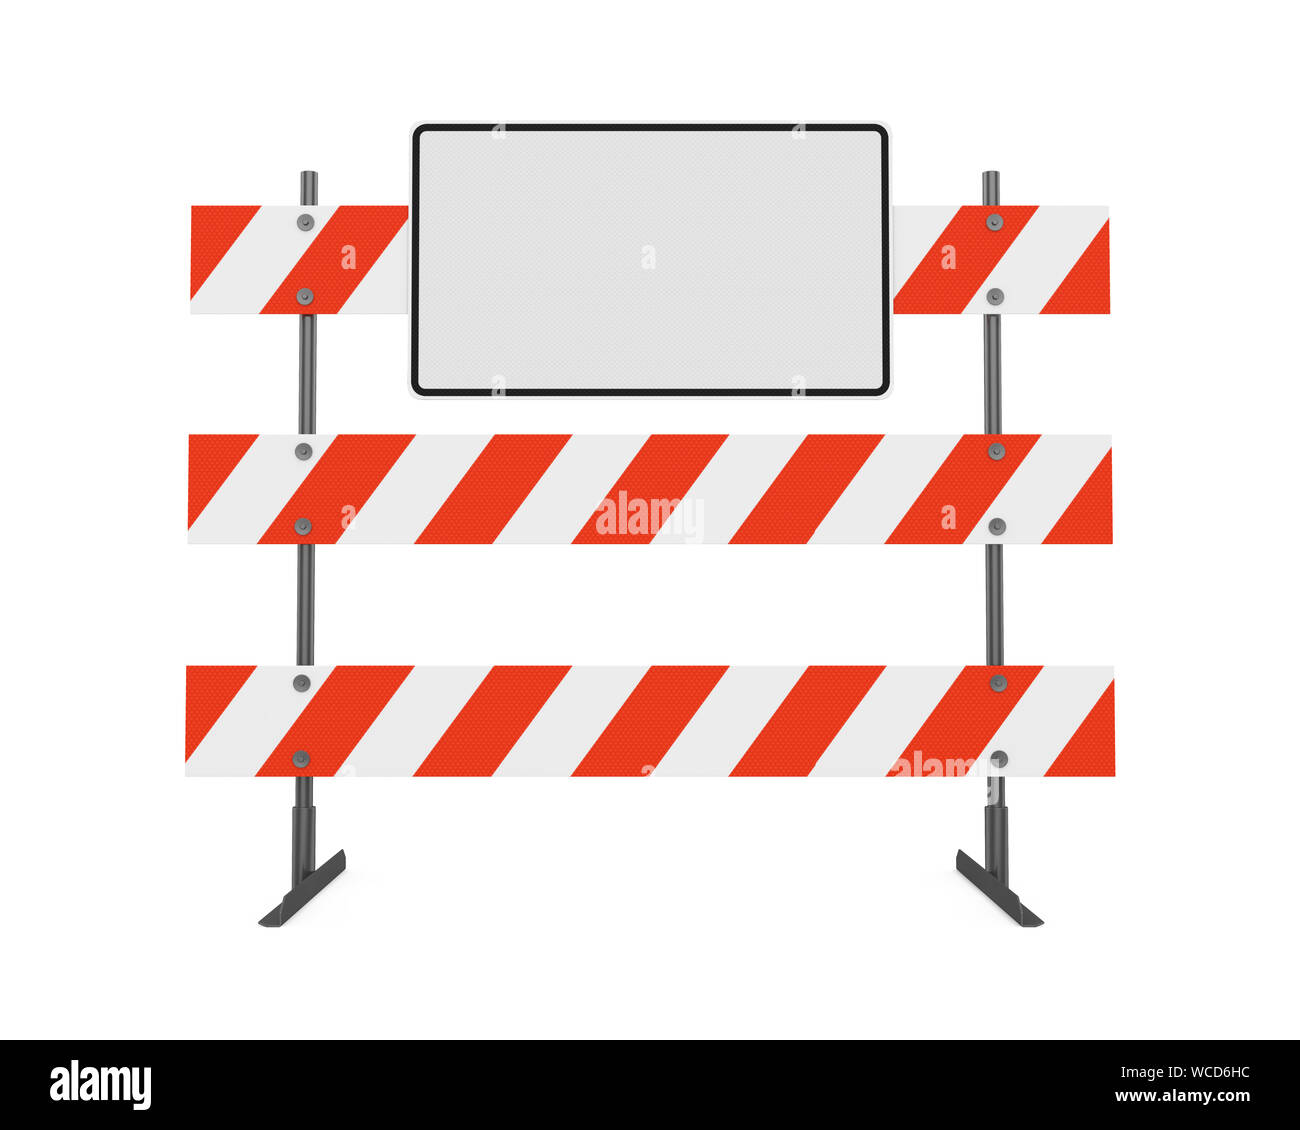 Under Construction Barrier Isolated Stock Photo